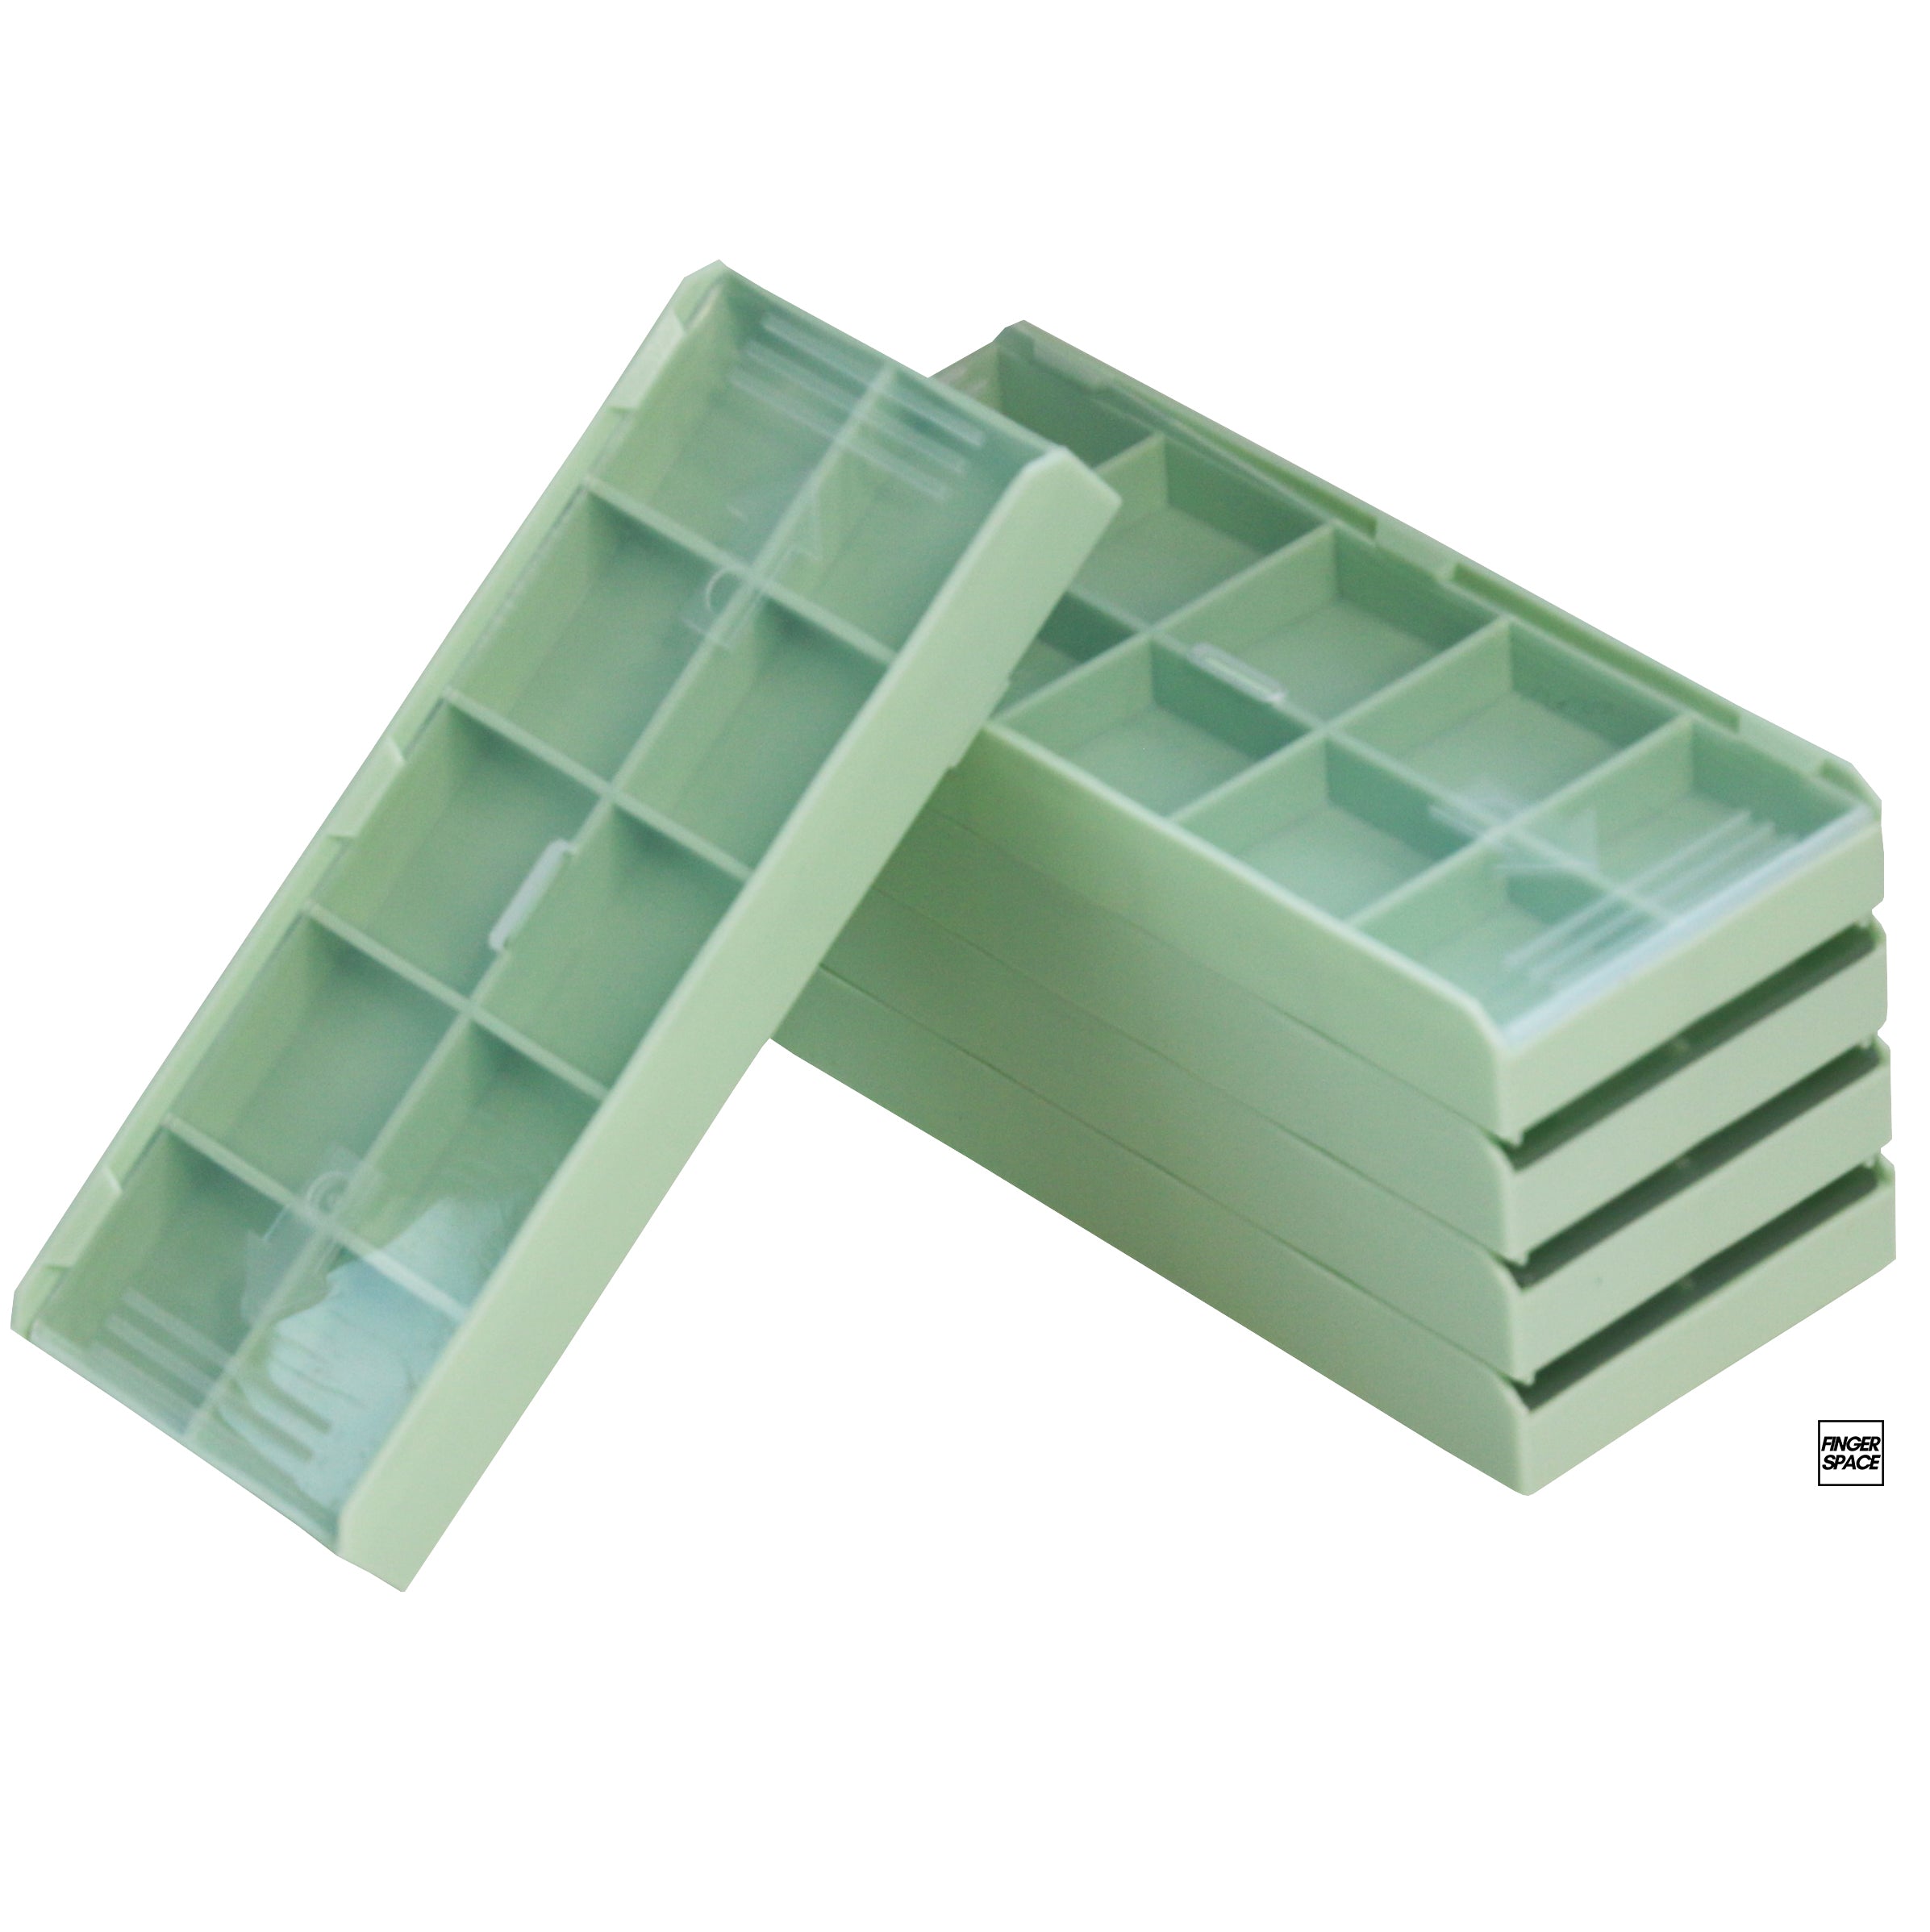 5-Pack of Seafoam Green "Space Cases" - Modular Stacking Storage Boxes